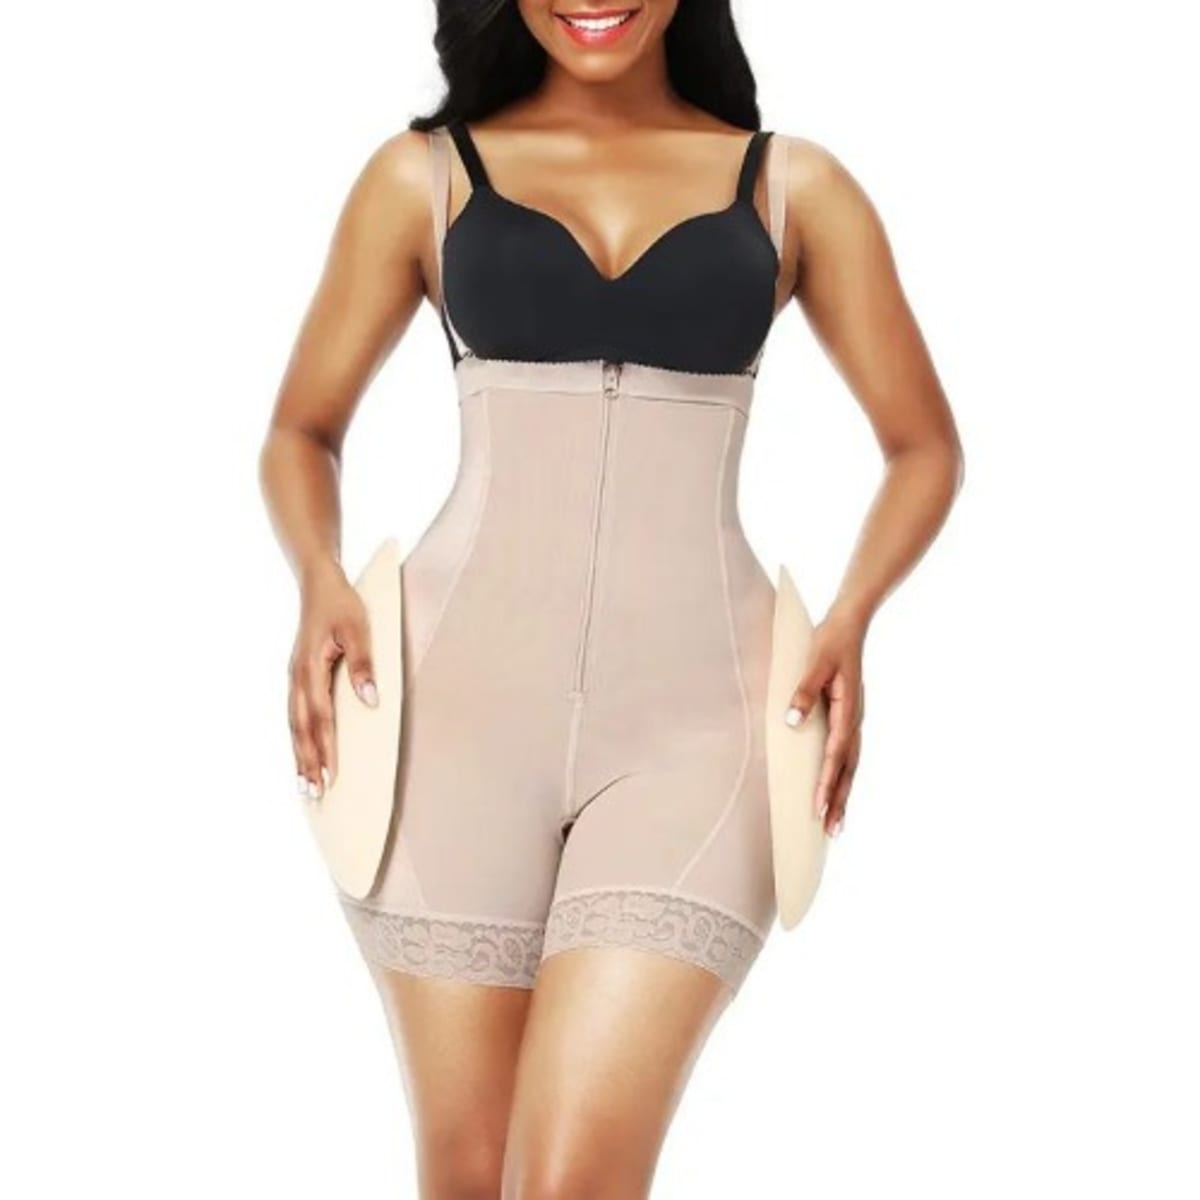 Find Cheap, Fashionable and Slimming silicone buttock and hip pads